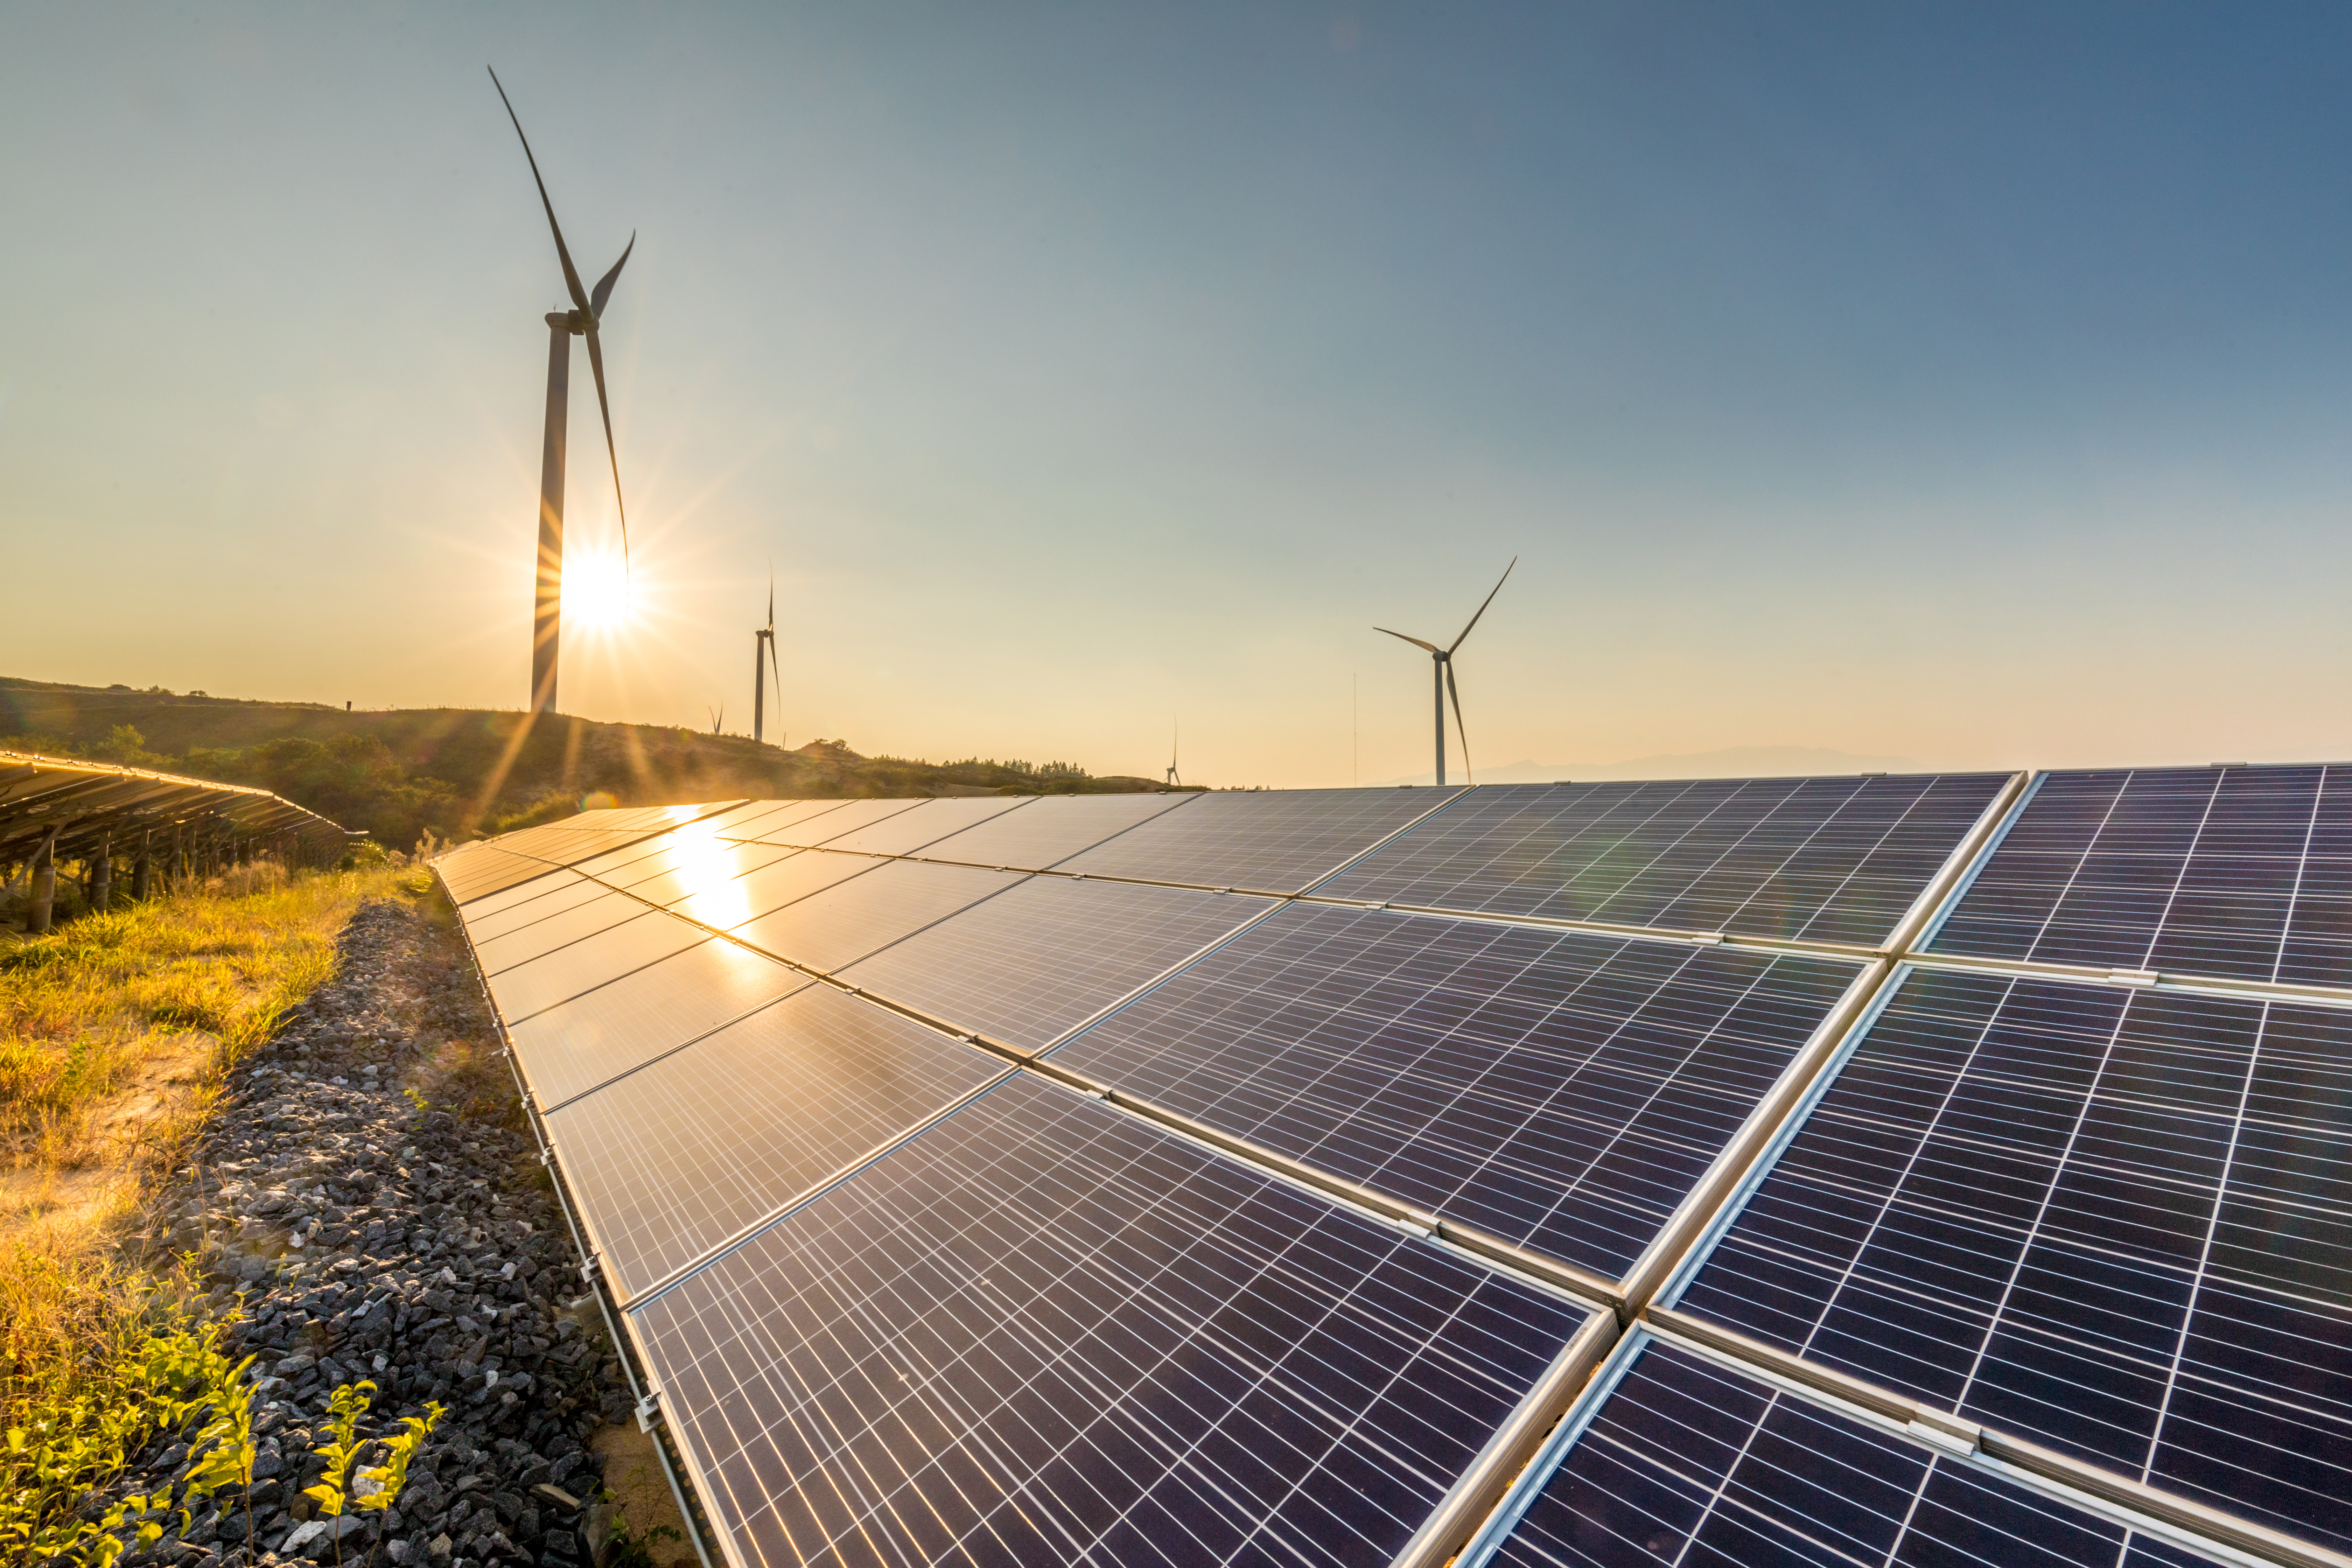 IEEFA: Renewables offer a win-win solution for Indonesia to achieve financial sustainability in its power sector and meet climate commitments